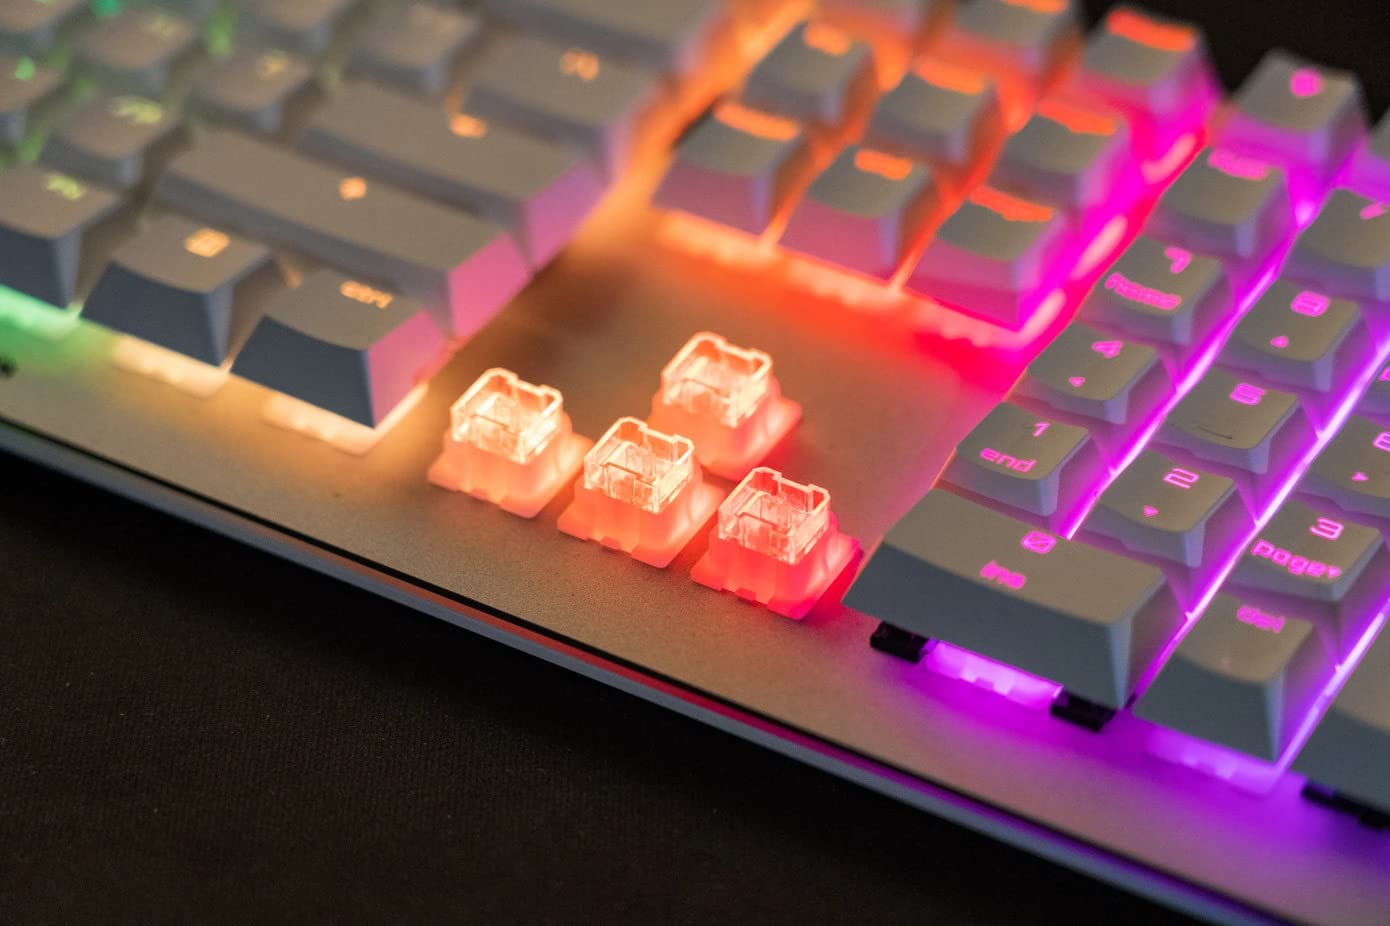 Cherry MV 3.0 Viola Wired Mechanical Gaming Keyboard. RGB Backlight with Cross Linear Viola Switches. from The Makers of The MX Switch. (Black)